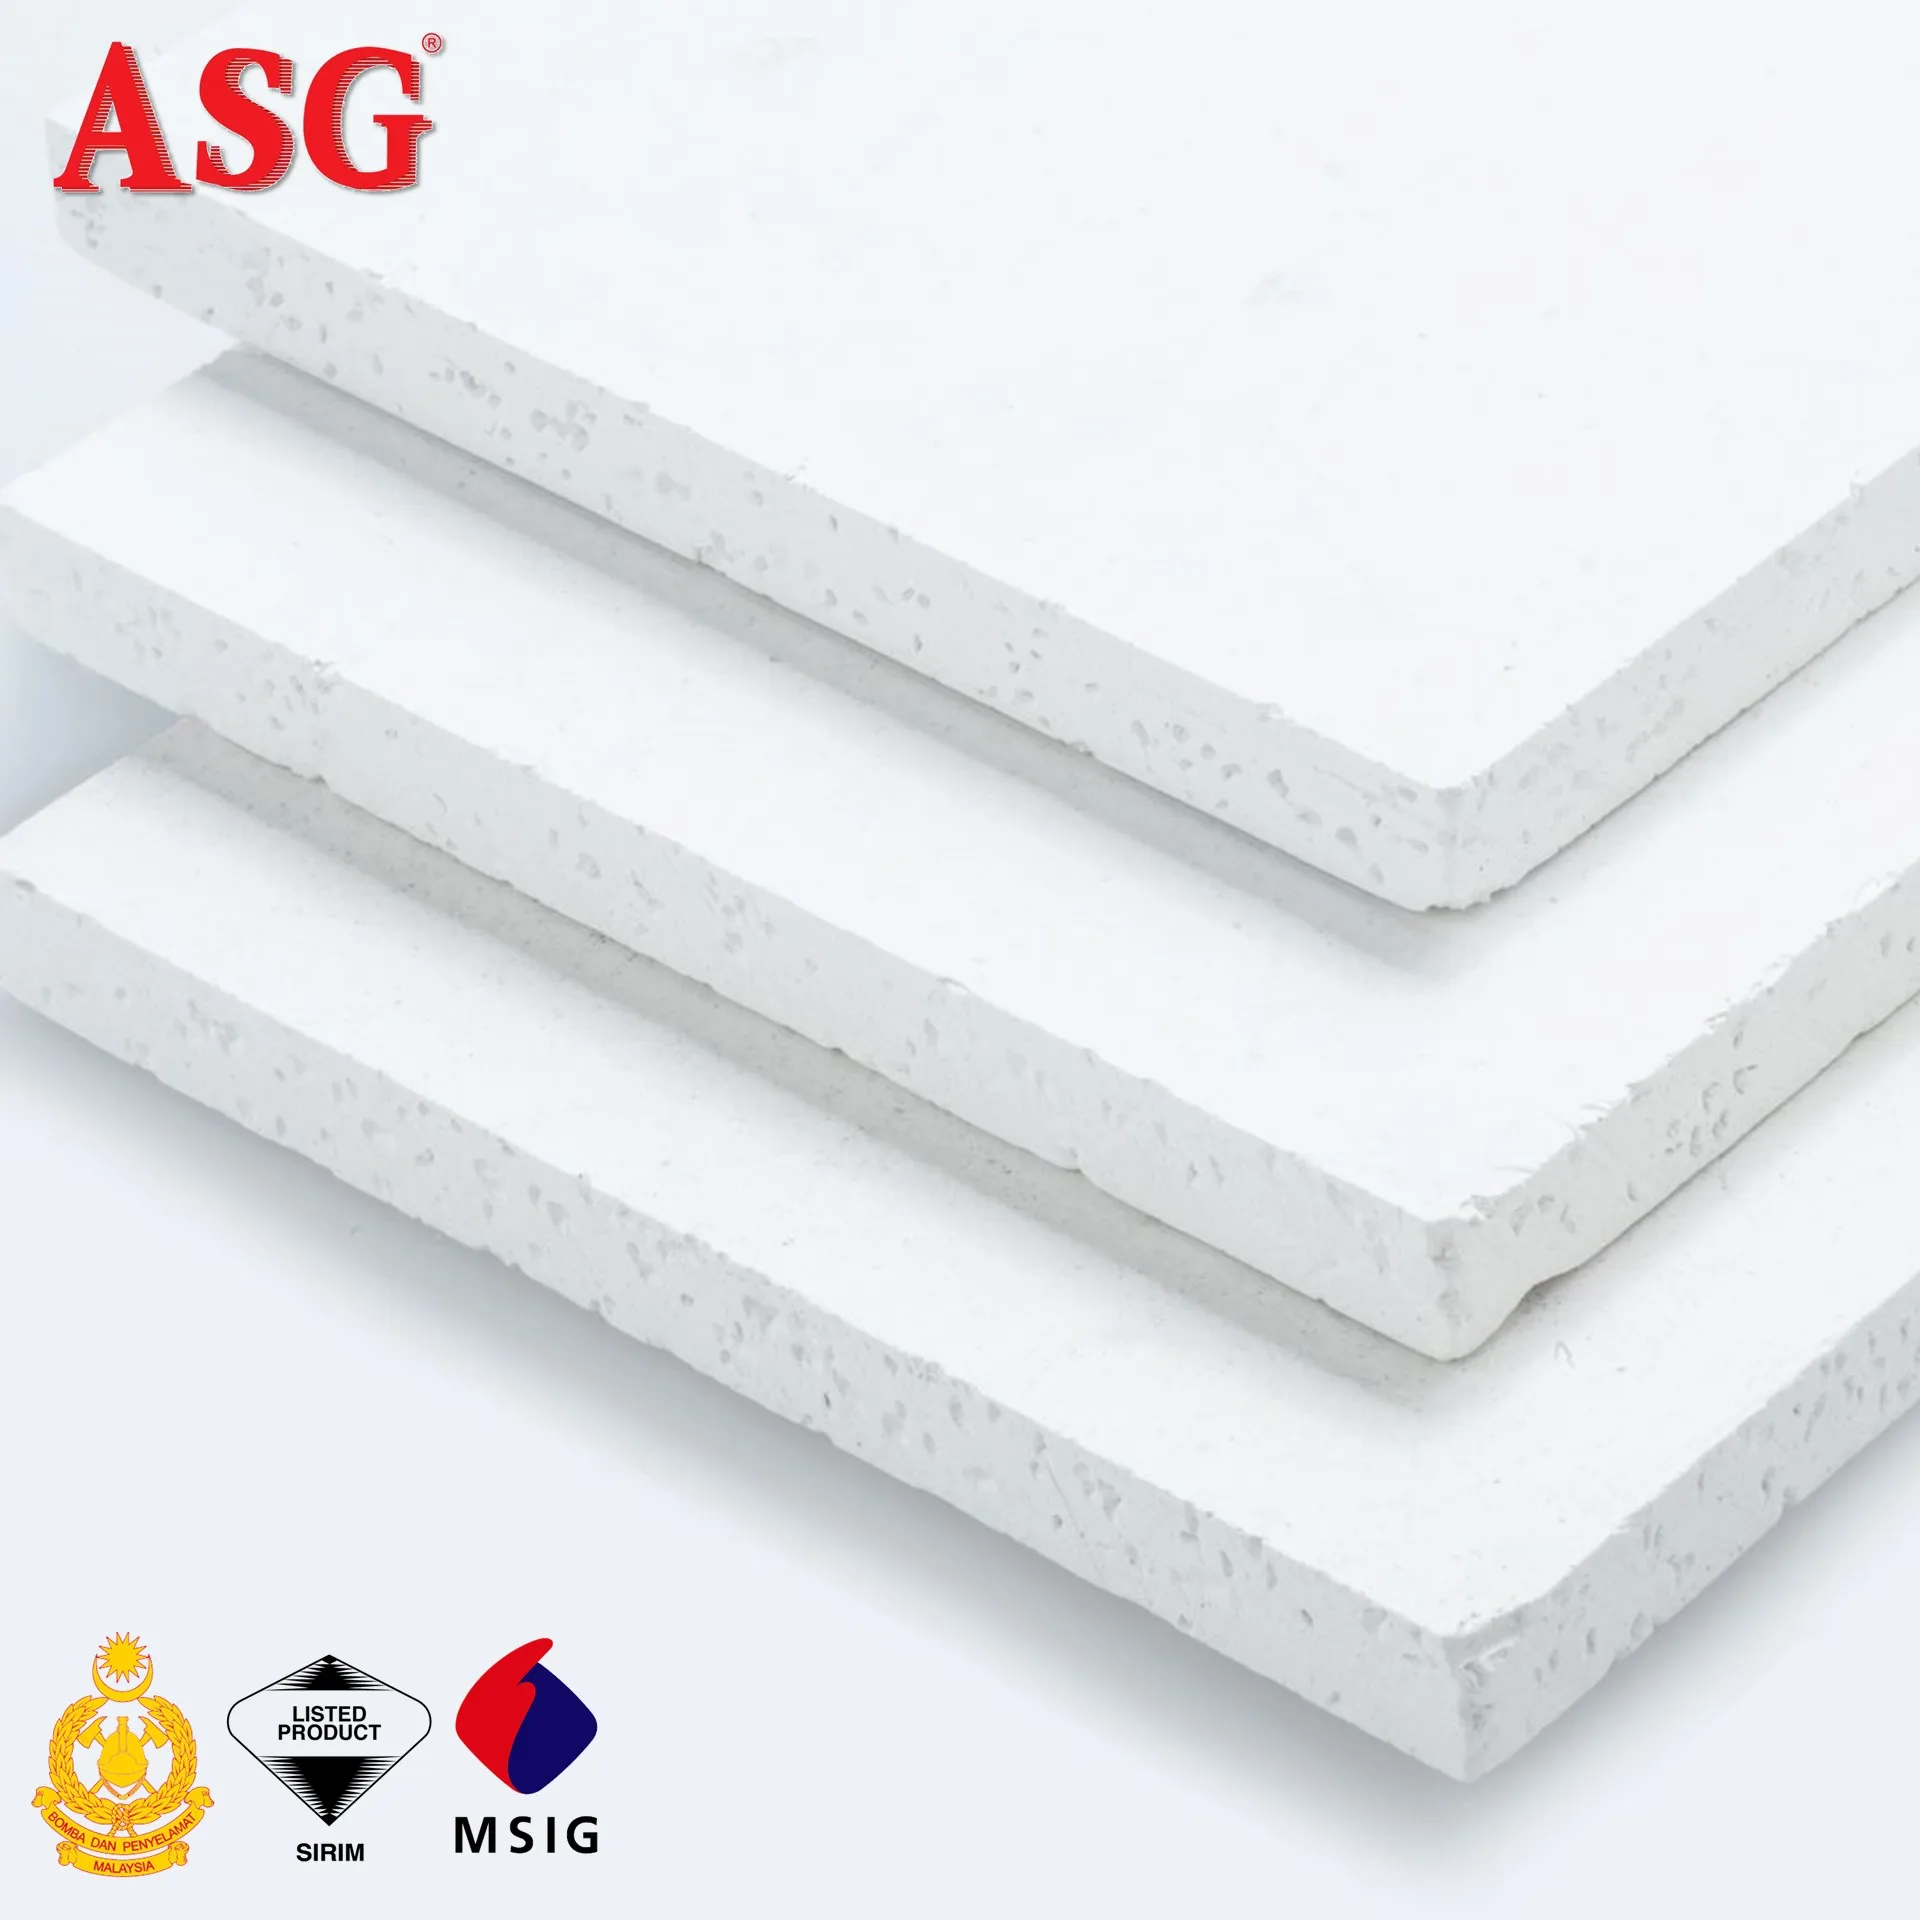 Asg Plaster Ceiling Board Plasterboard Gypsum Drywall Plasterboard Manufactured In Malaysia Buy Gypsum Board Plaster Ceiling Board Plasterboard